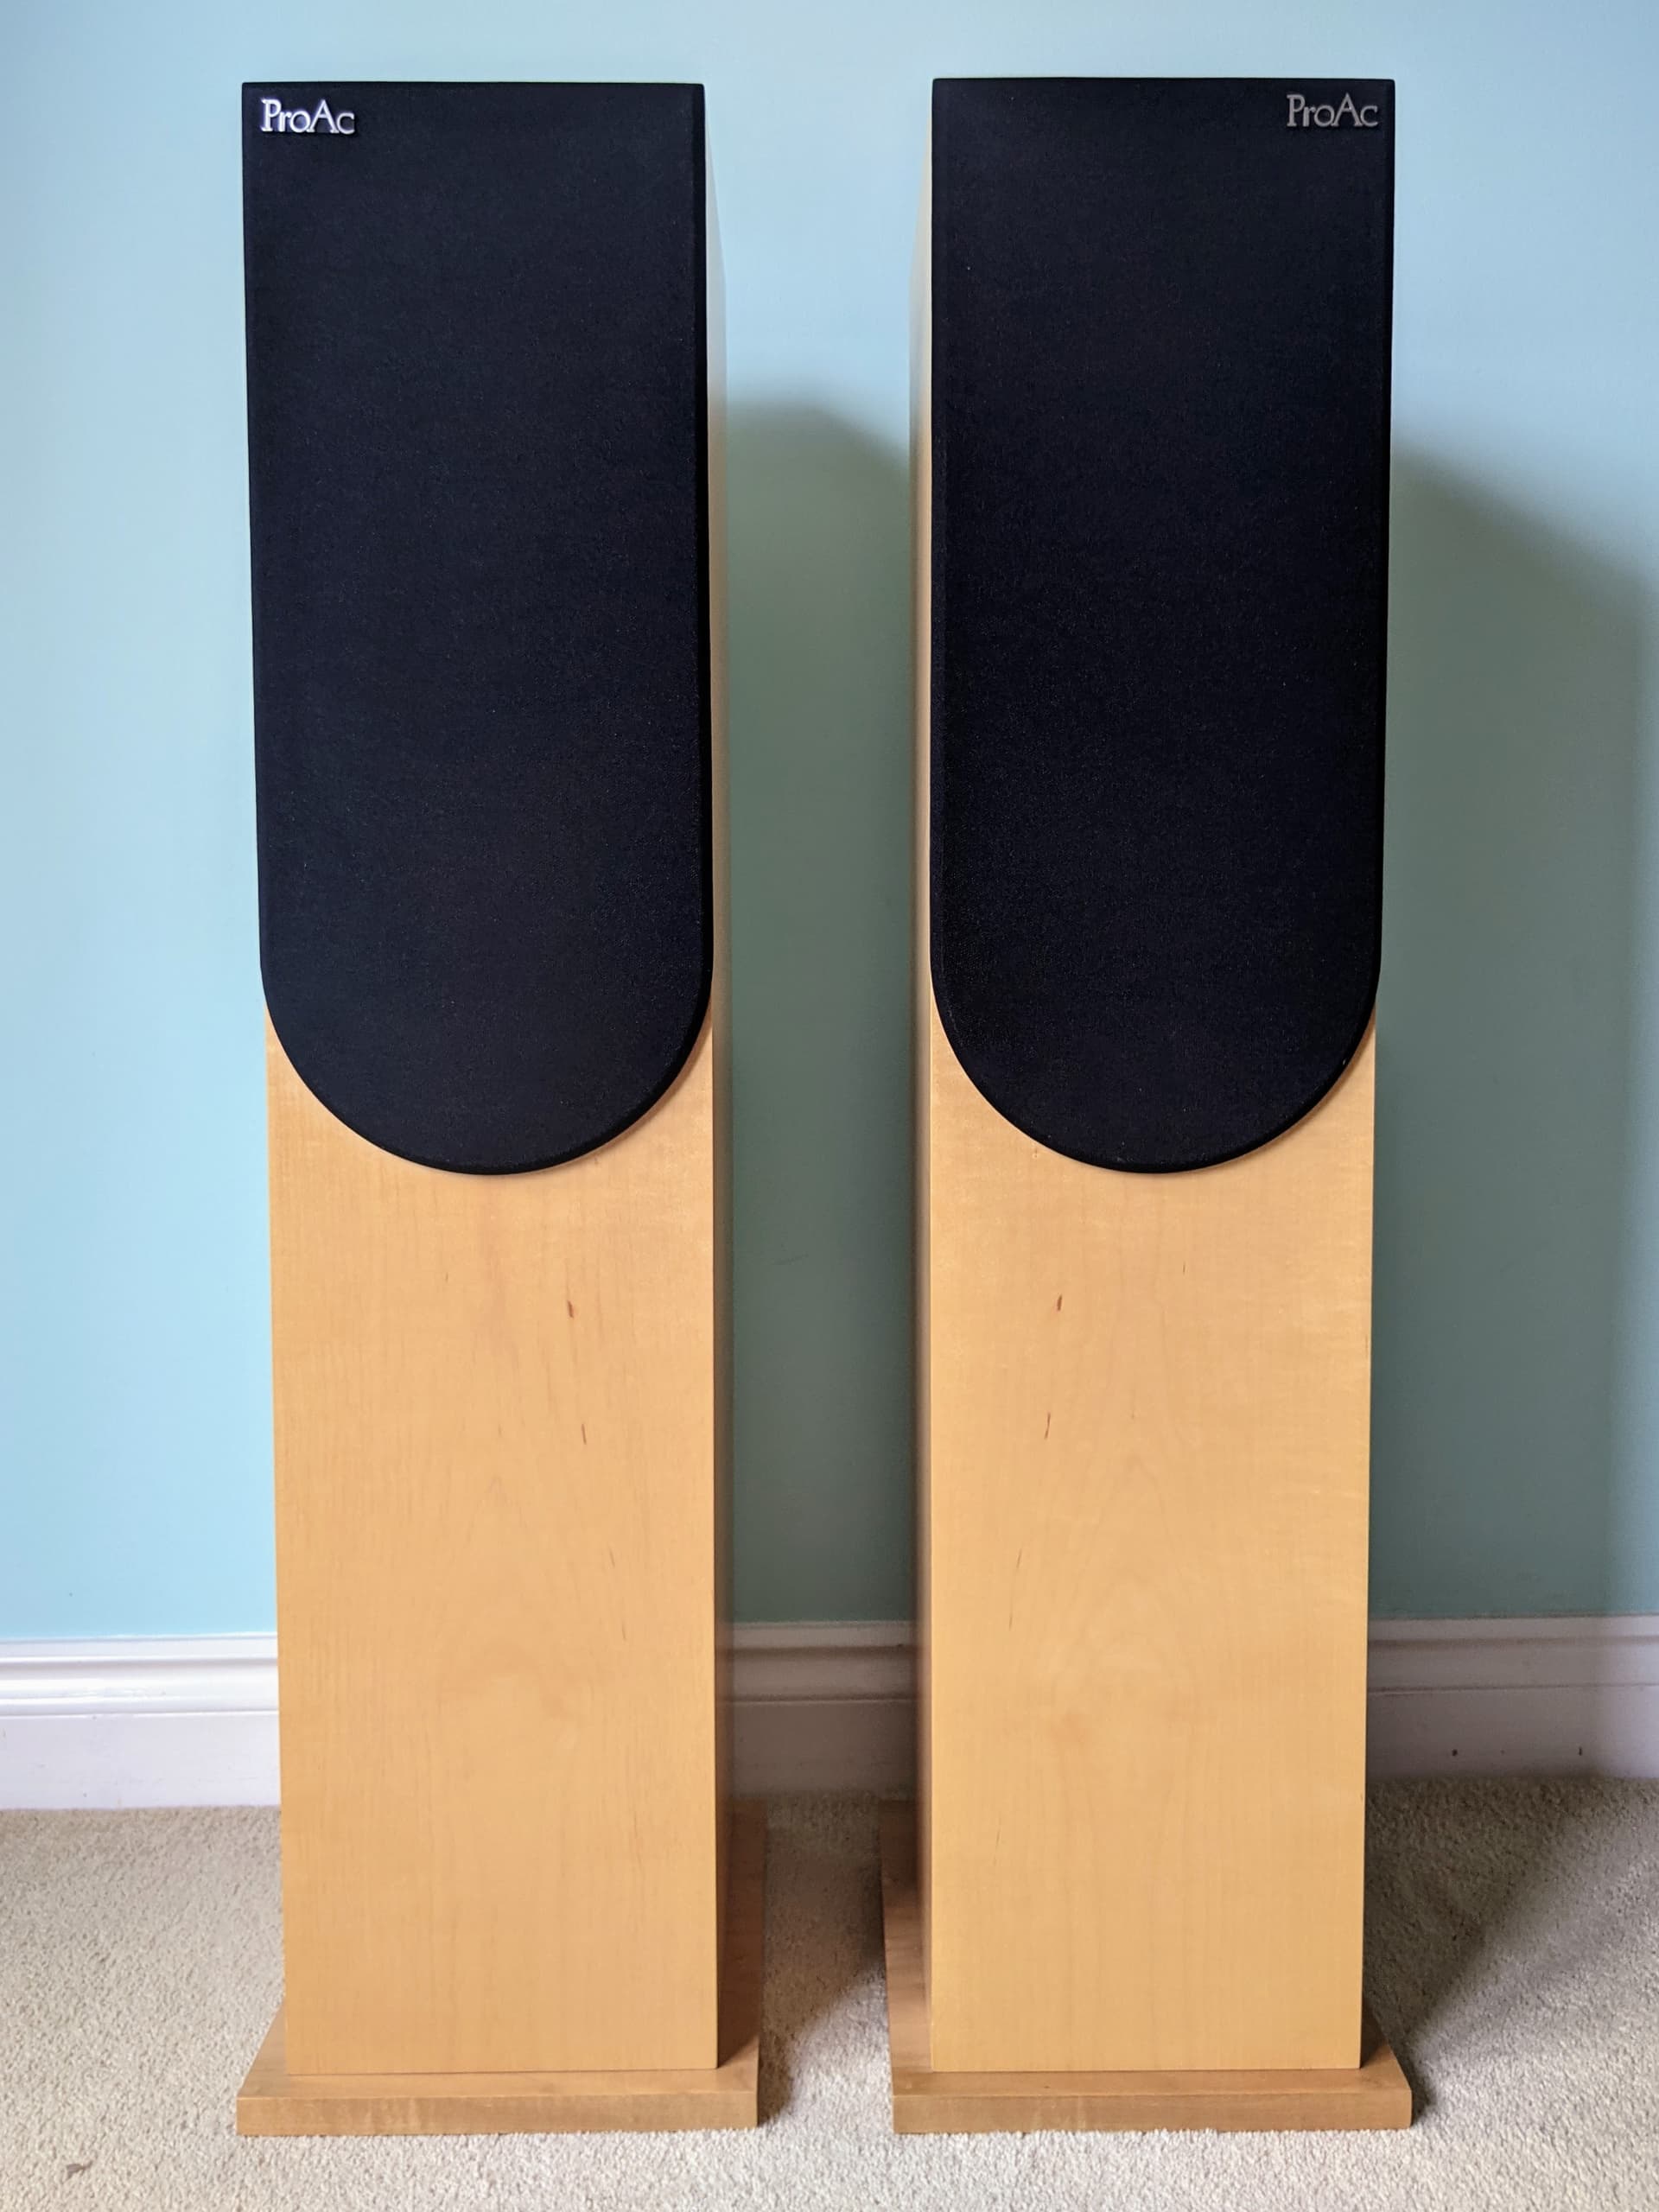 FS: ProAC Studio 125 loudspeakers [SOLD] - Sales and Trades - Roon Labs  Community